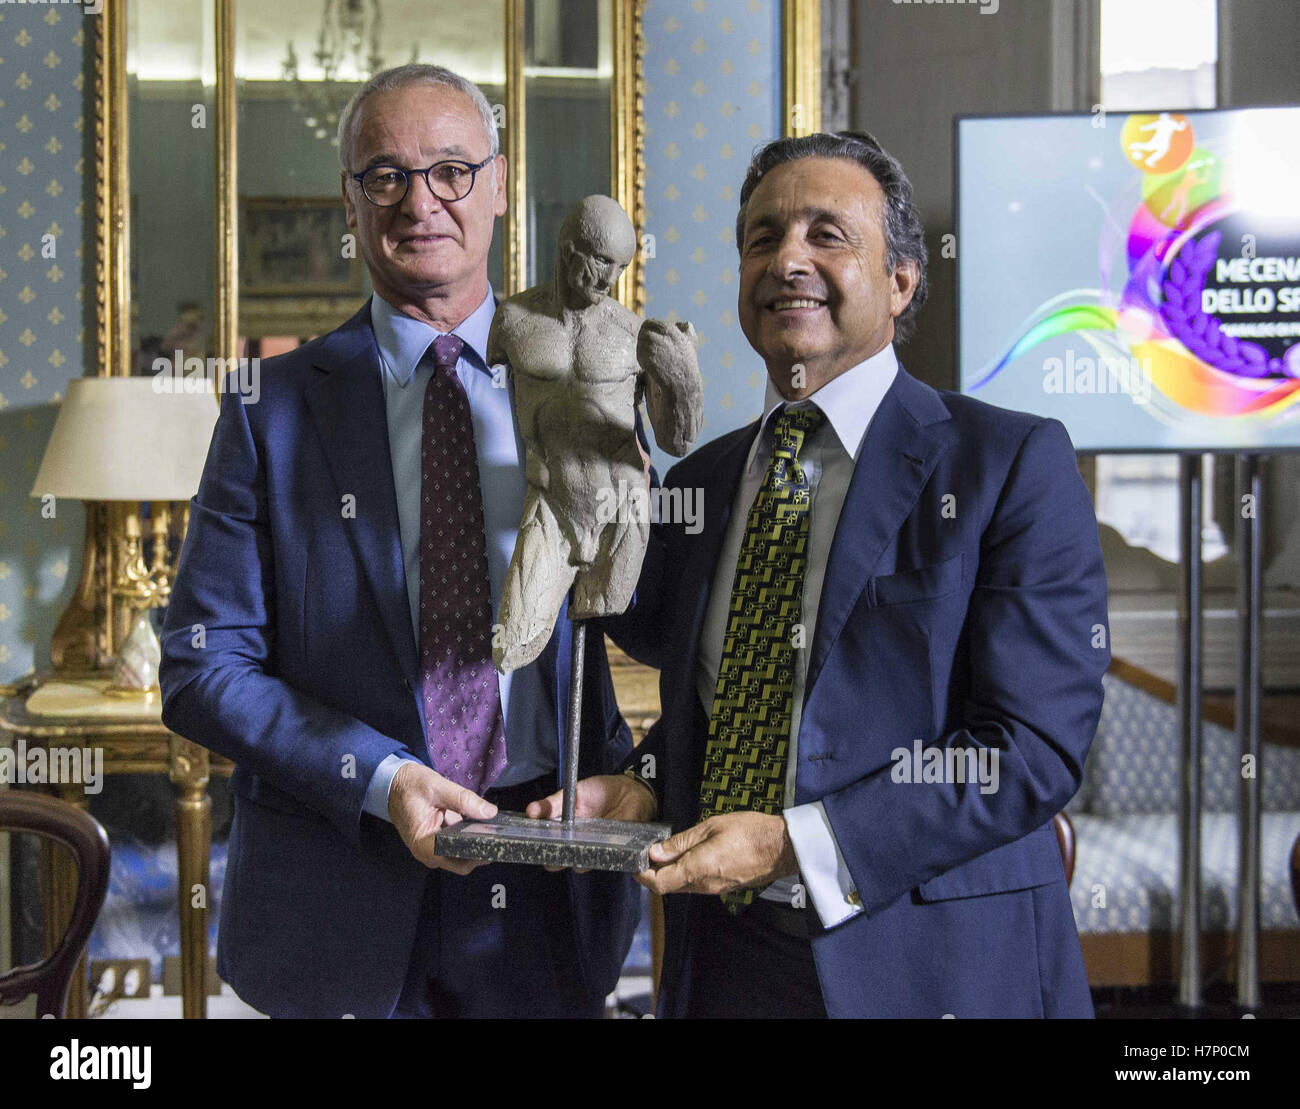 Claudio Ranieri is presented with the 'Maecenas of Sport' award in Rome  Featuring: Claudio Ranieri Where: Rome, Italy When: 06 Oct 2016 Credit: IPA/WENN.com  **Only available for publication in UK, USA, Germany, Austria, Switzerland** Stock Photo